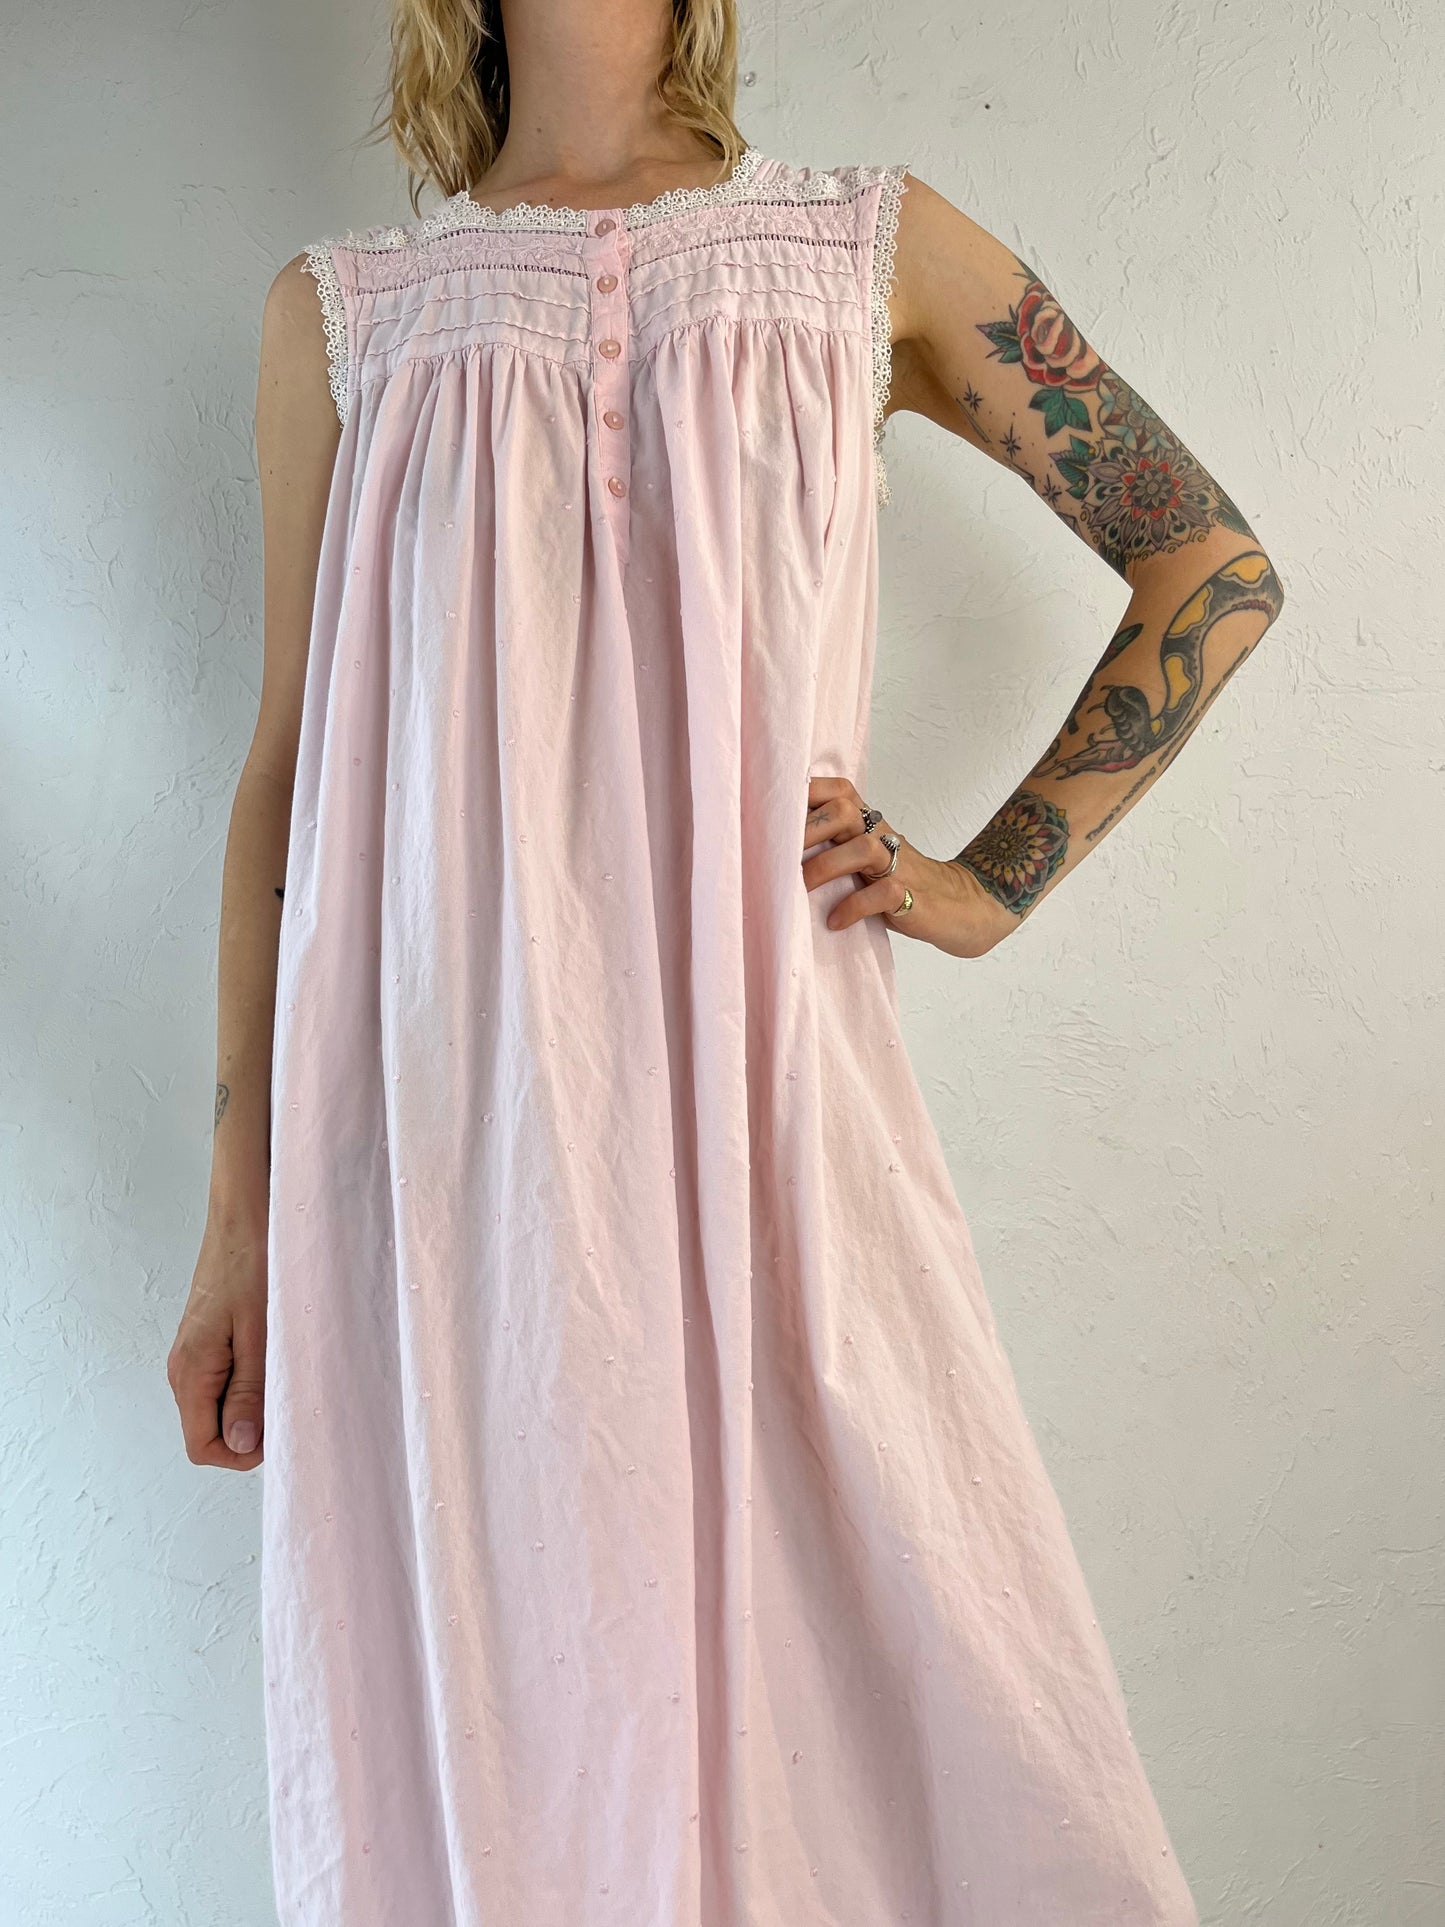 Y2k 'Erica Taylor' Pink Cotton Embroidered Night Dress / Large